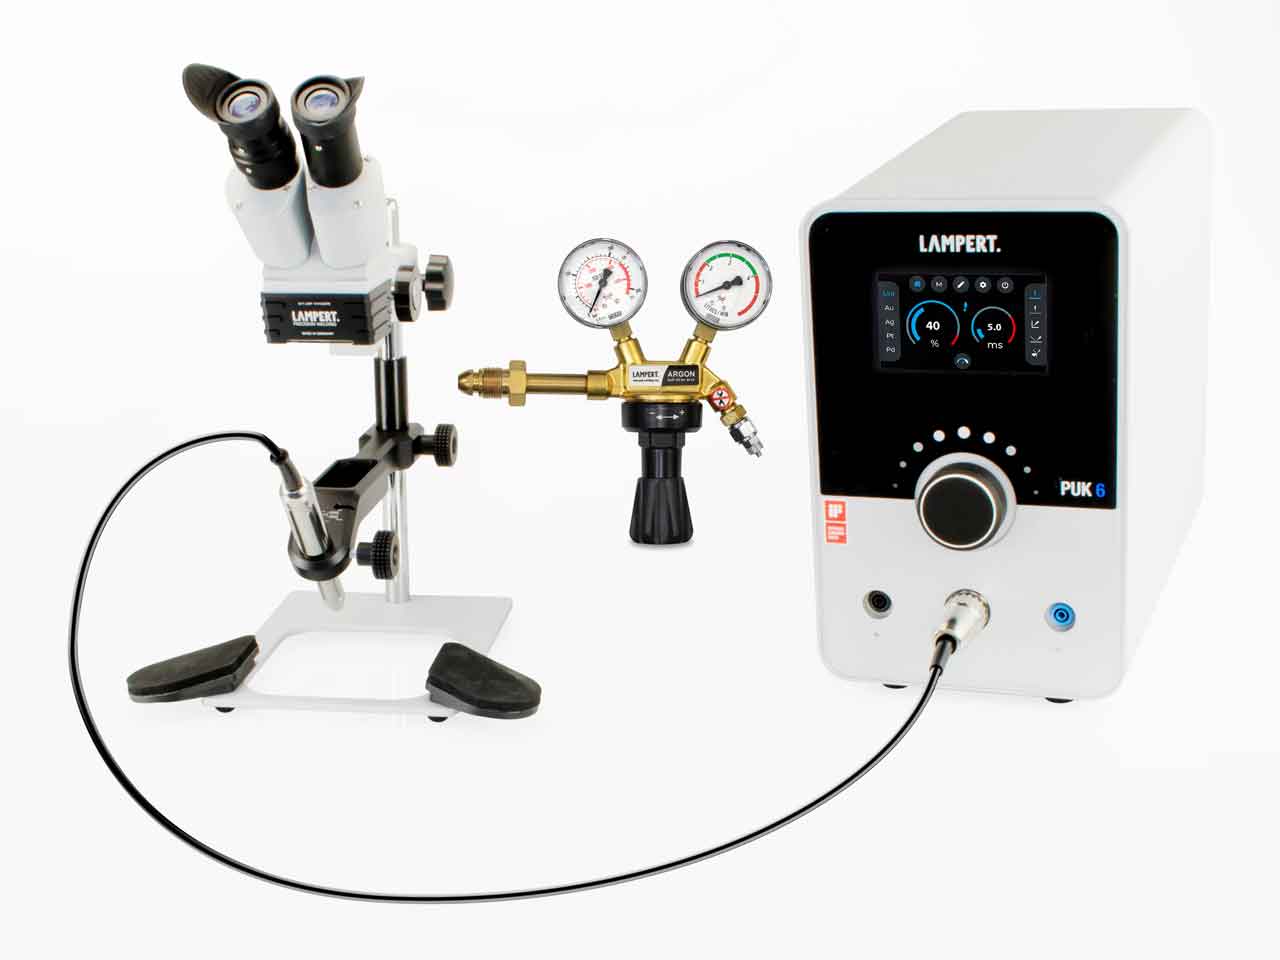 Lampert PUK 6 Tig Welder With Sm6 X10 Magnification Microscope And Argon Regulator Questions & Answers